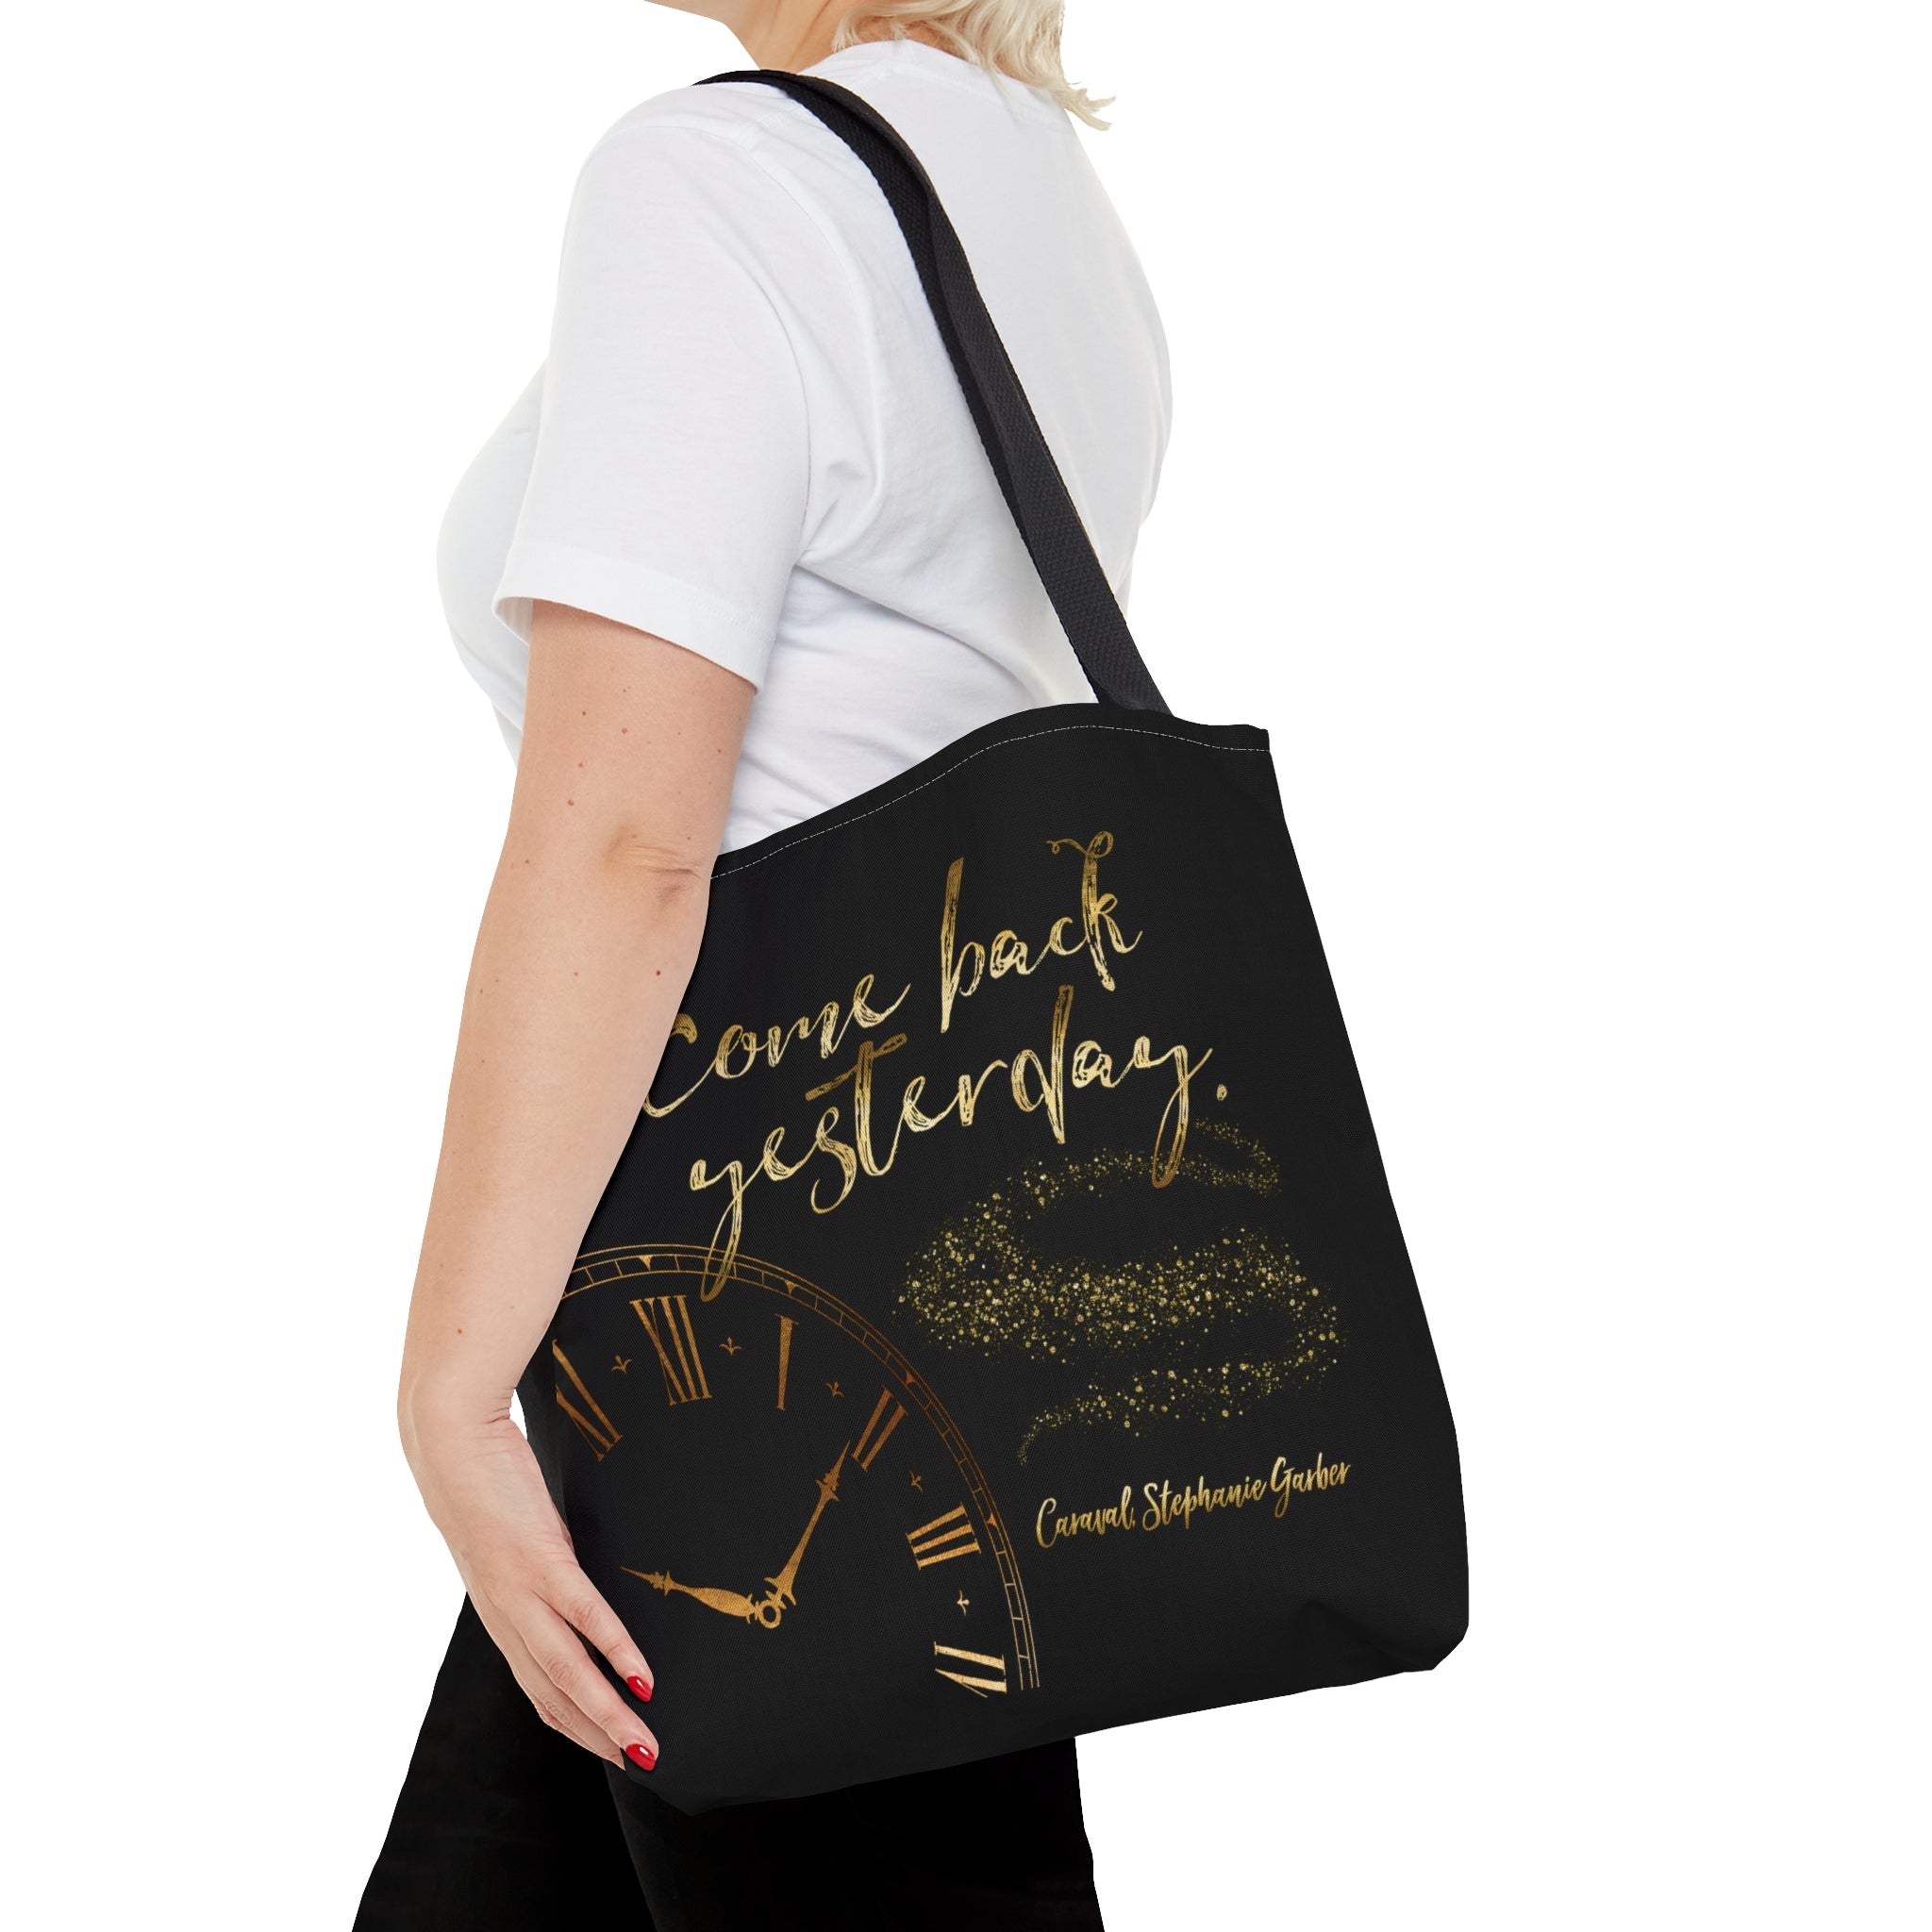 Come back yesterday. Caraval Tote Bag